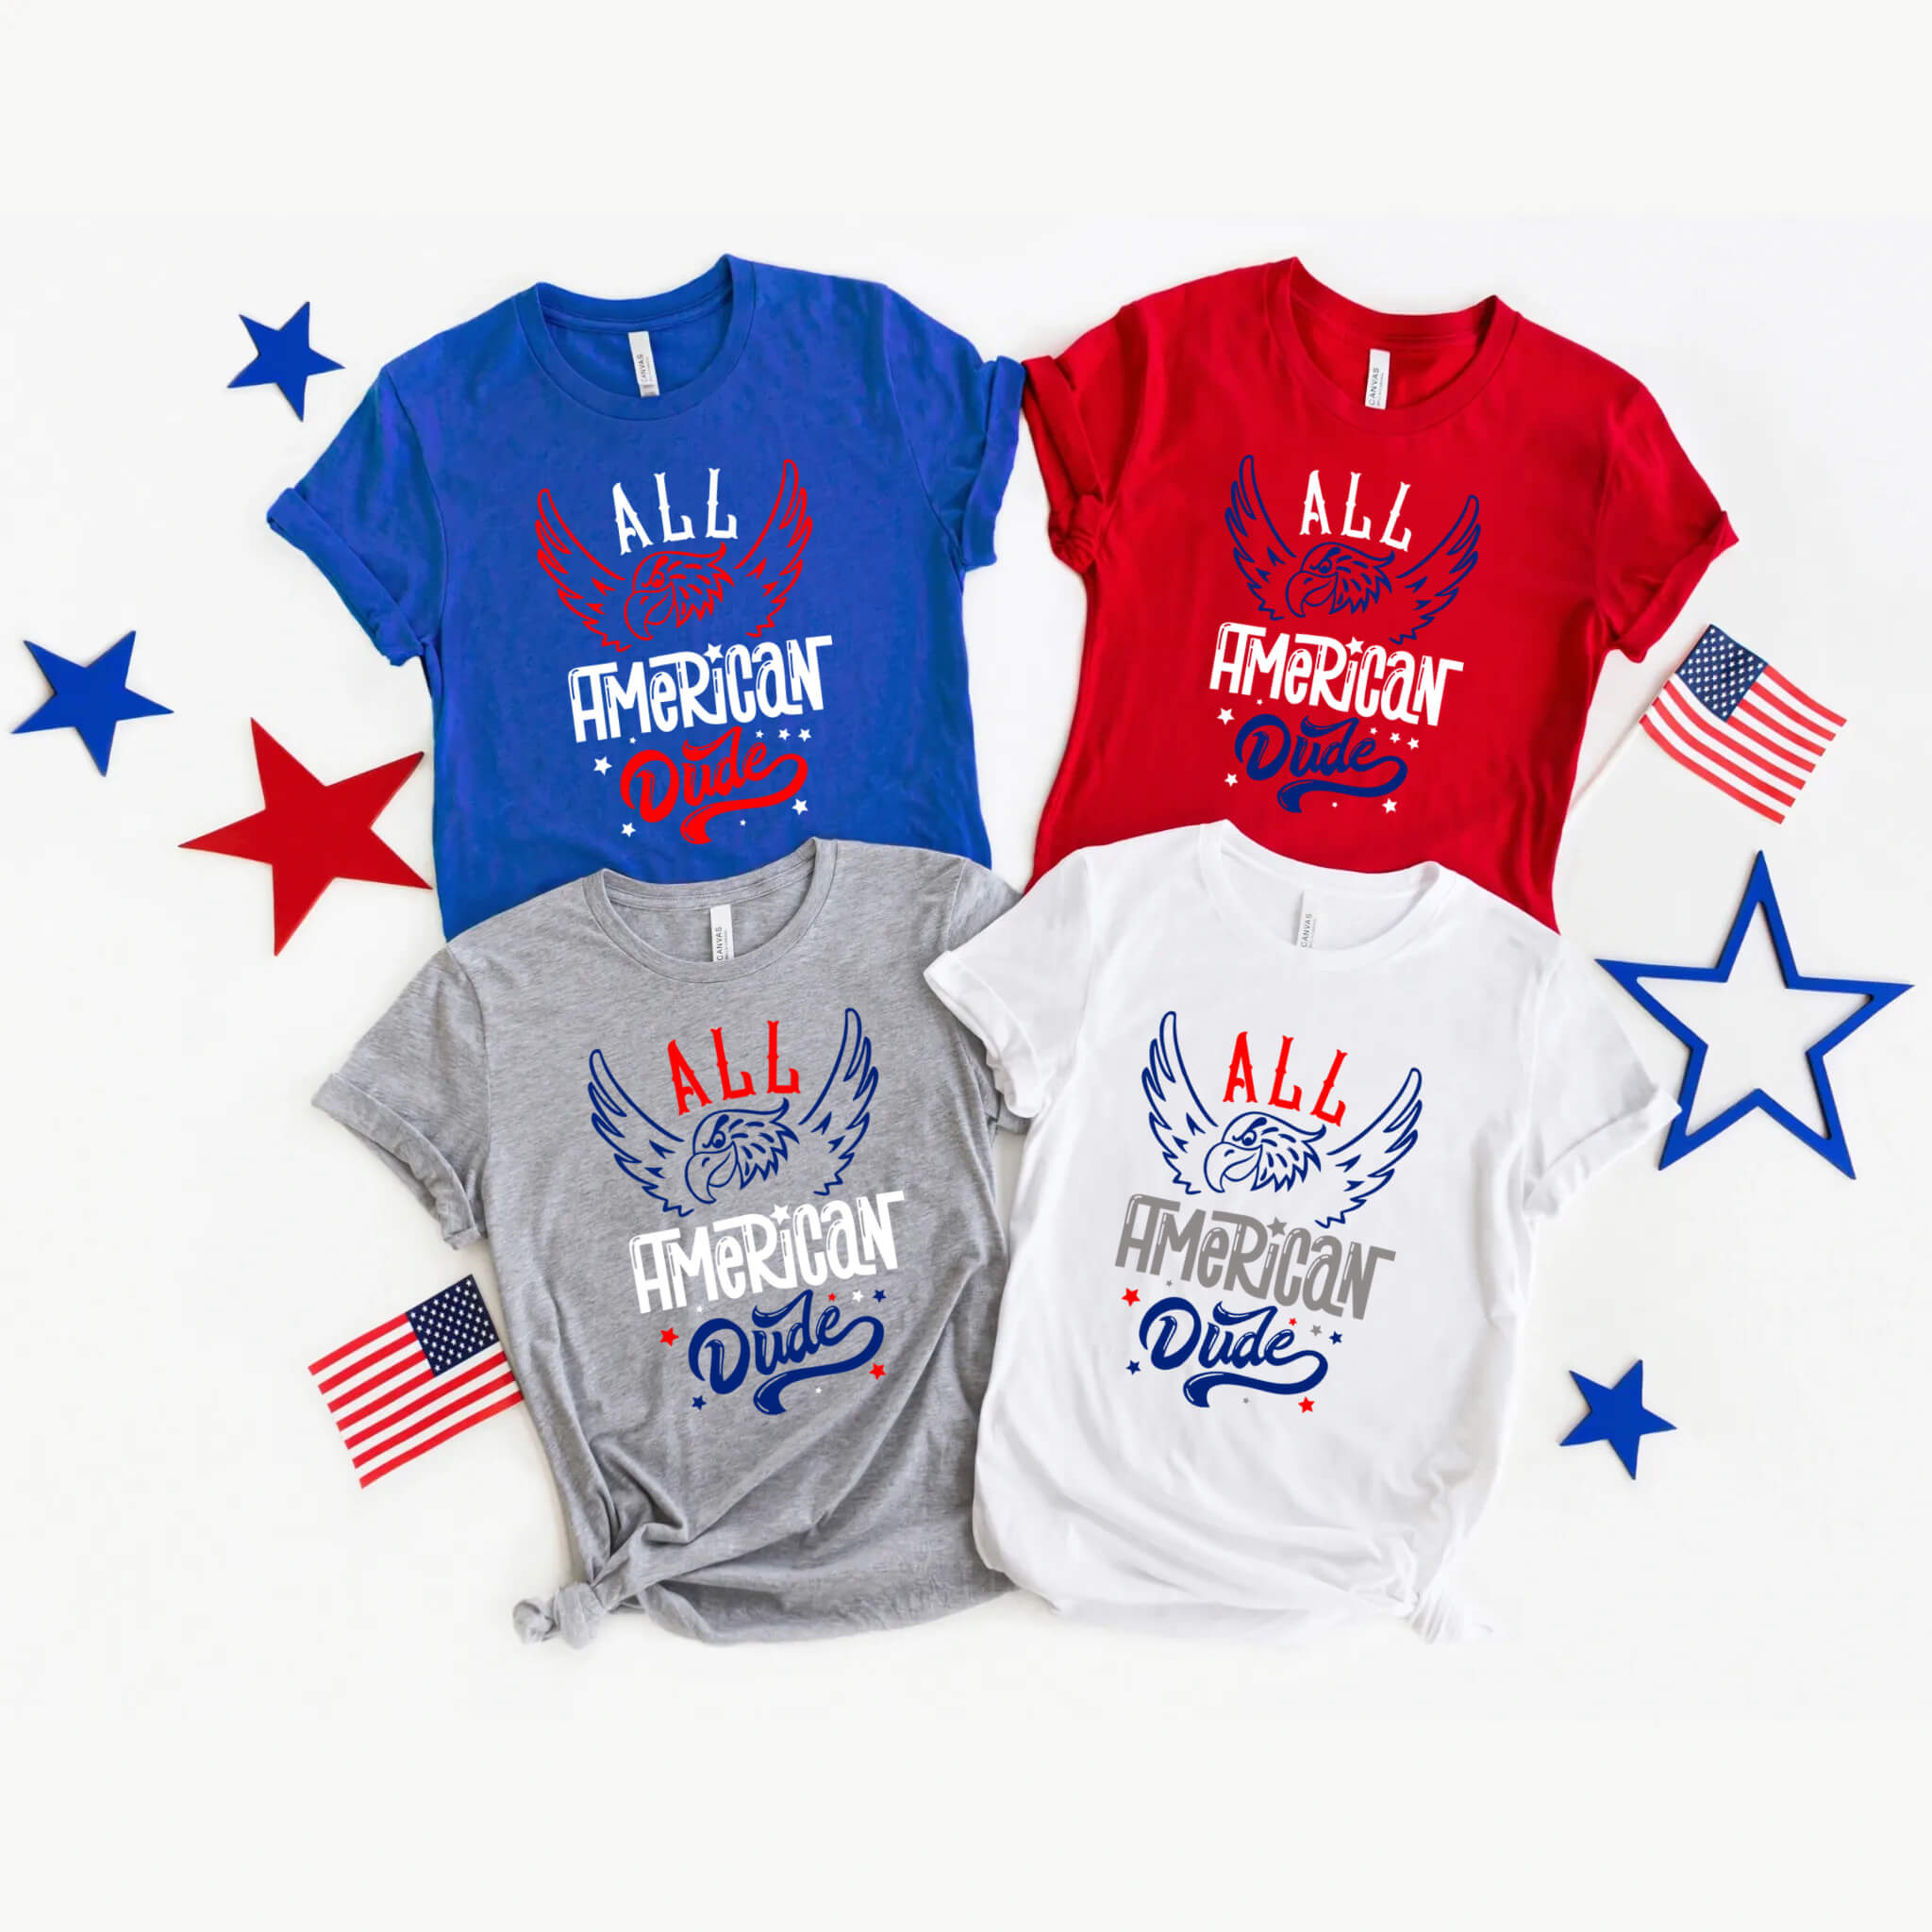 4th of July - All American Dude Patriotic Men’s Graphic Print T-Shirt